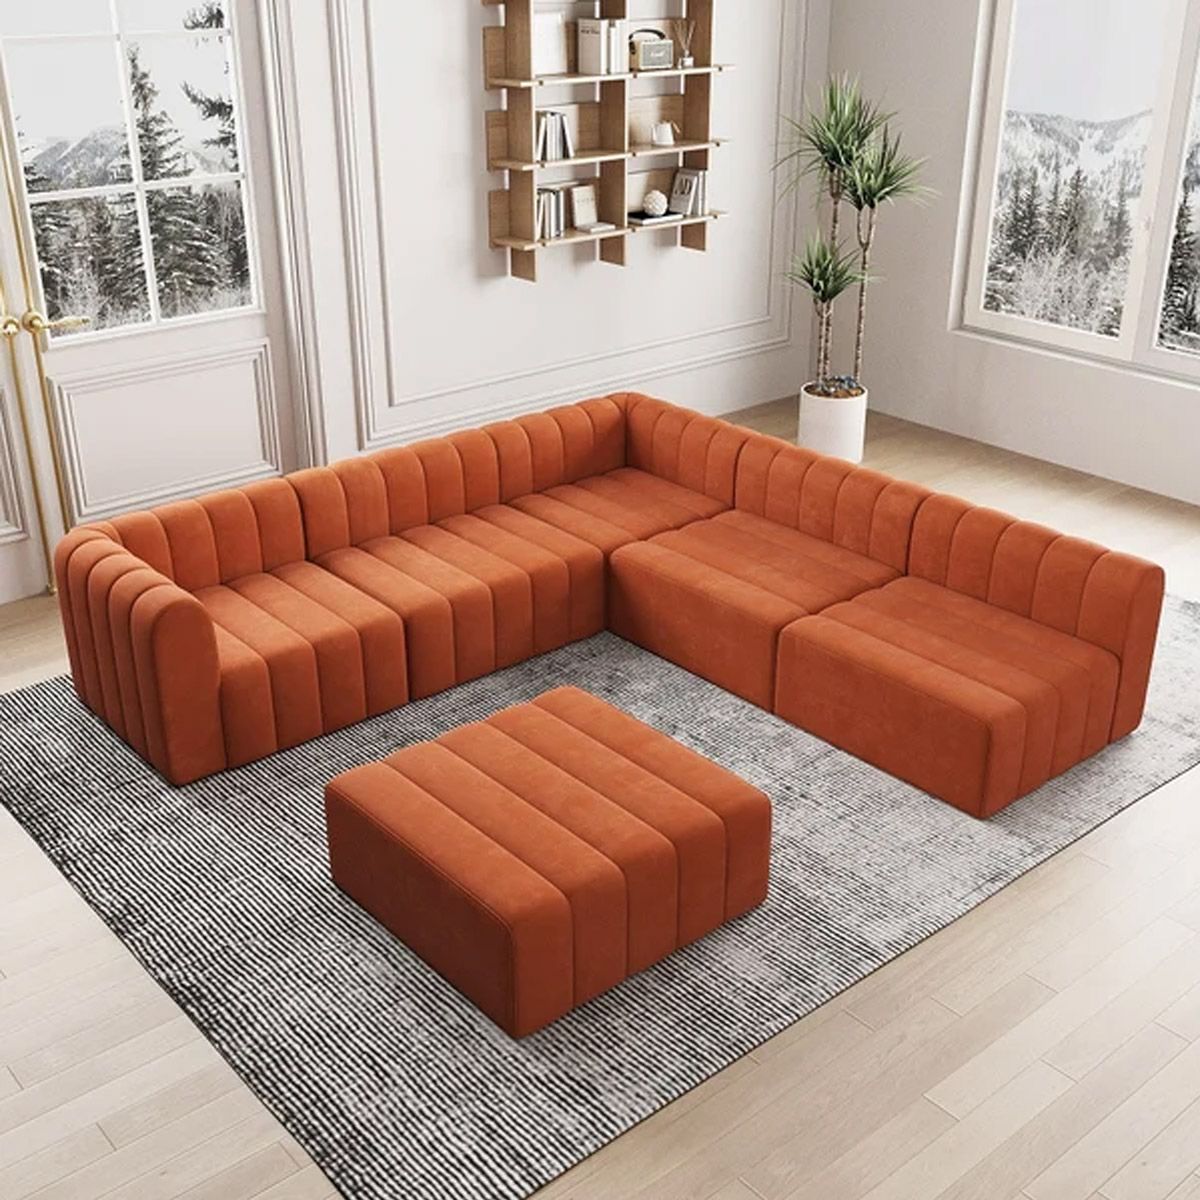 Chelsea Channel Velvet Modular Sectional Sofa Set Convertible 6 Seater Sofa  Orange From Aed 7749  Atoz Furniture Pertaining To Cream Velvet Modular Sectionals (Photo 15 of 15)